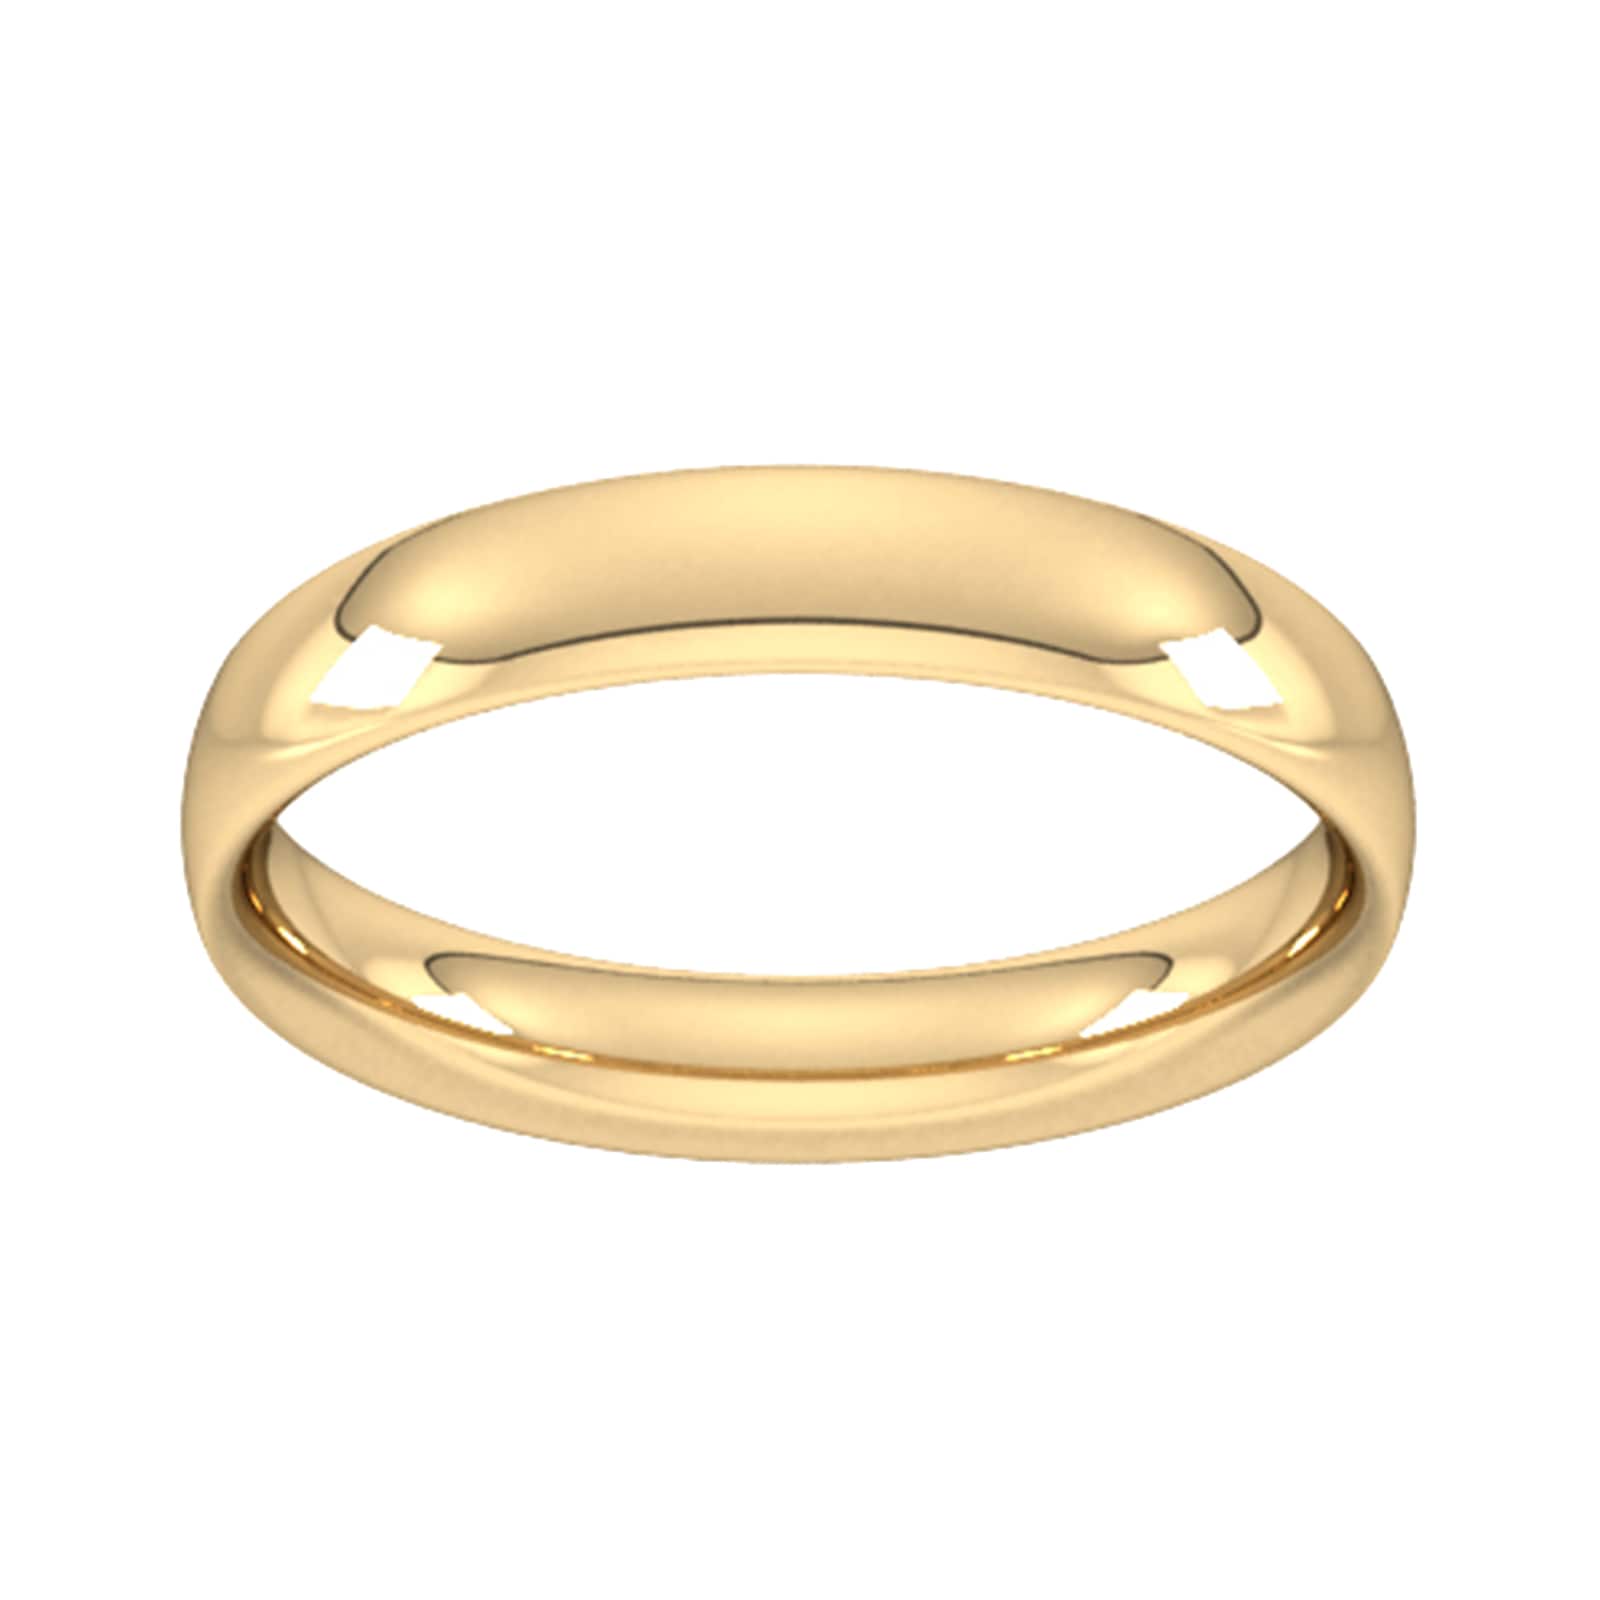 4mm Traditional Court Heavy Wedding Ring In 9 Carat Yellow Gold - Ring Size G